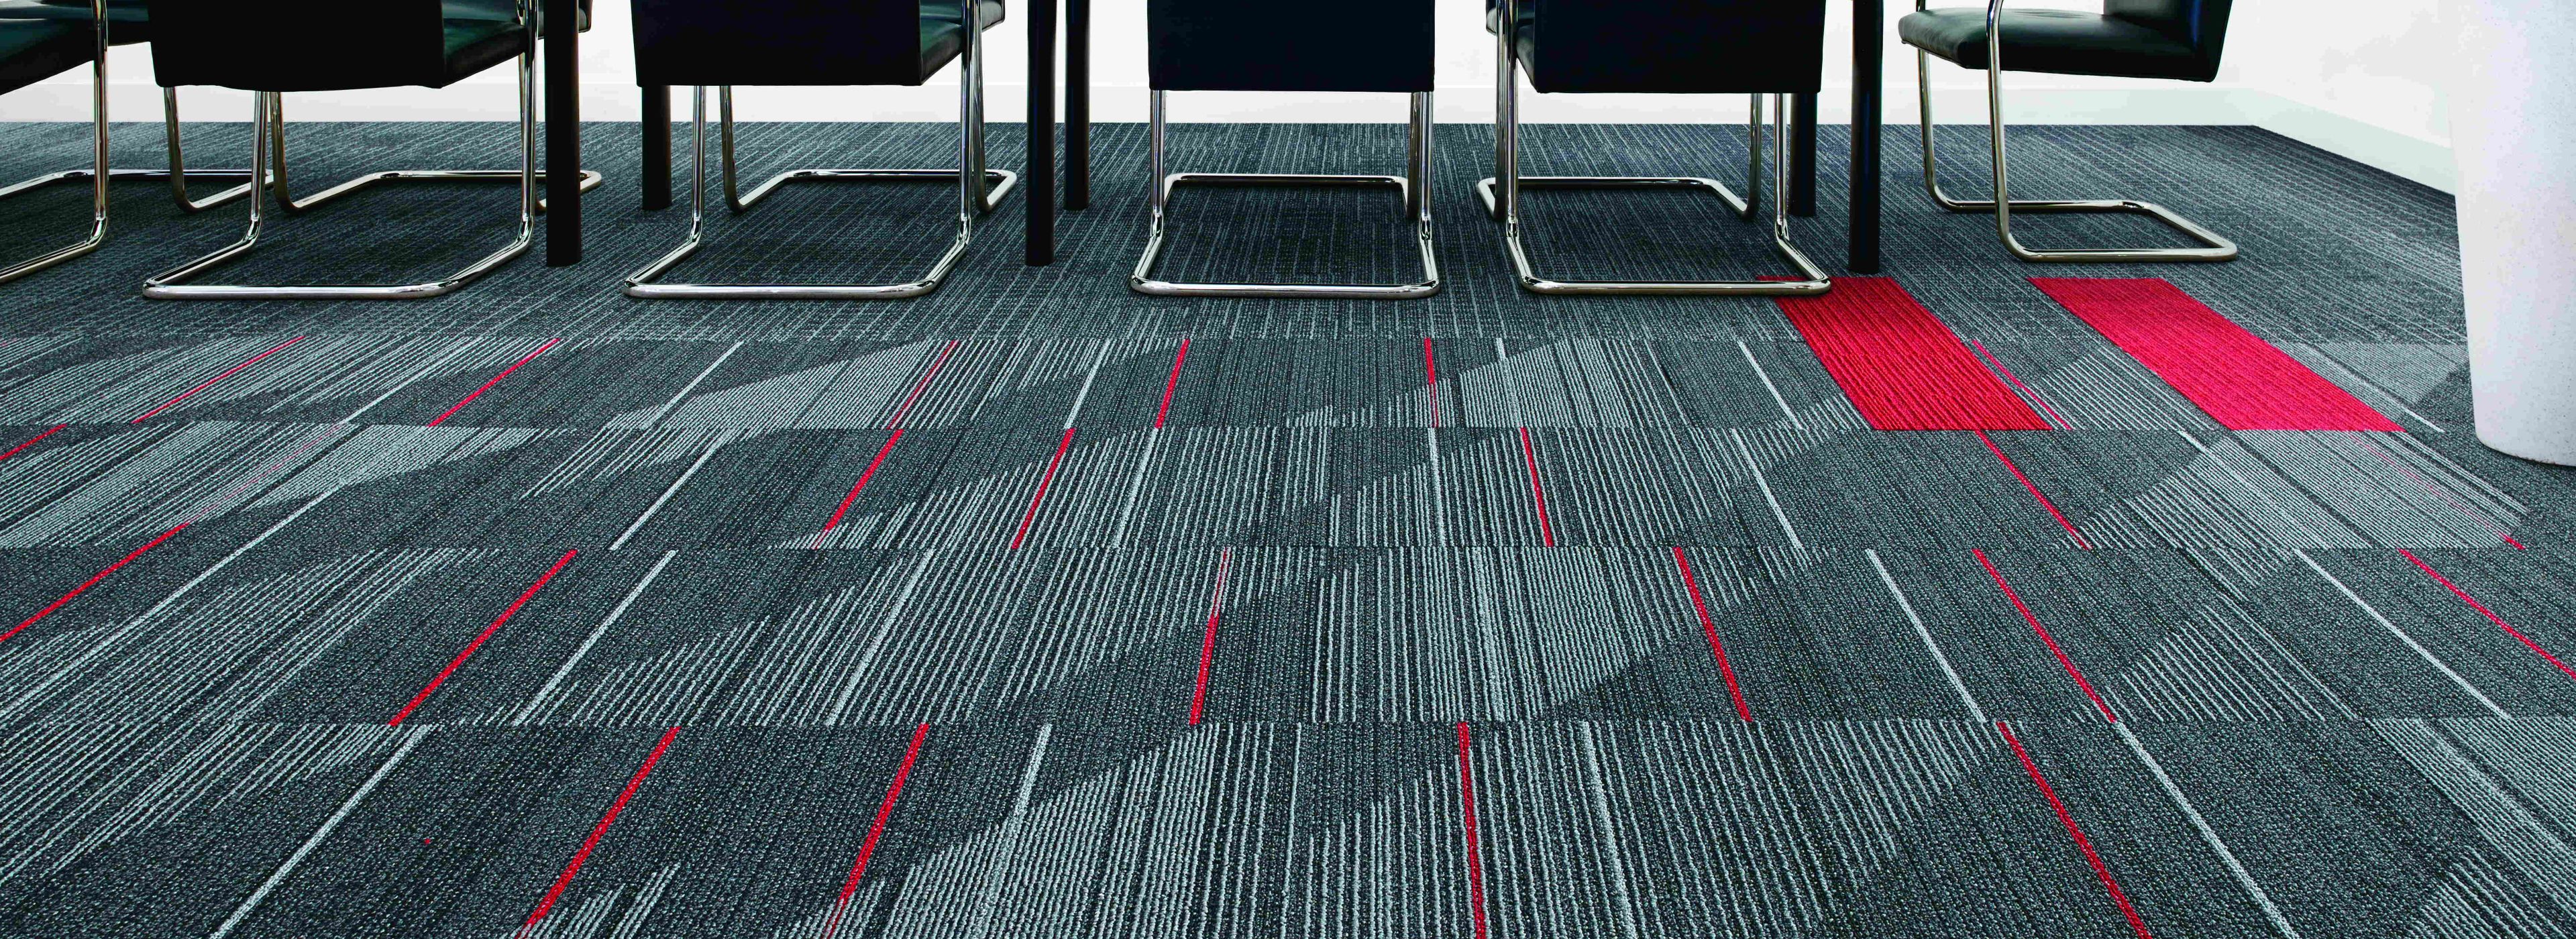 Interface CT111 and On Line plank carpet tile with Detours carpet tile in meeting room image number 1